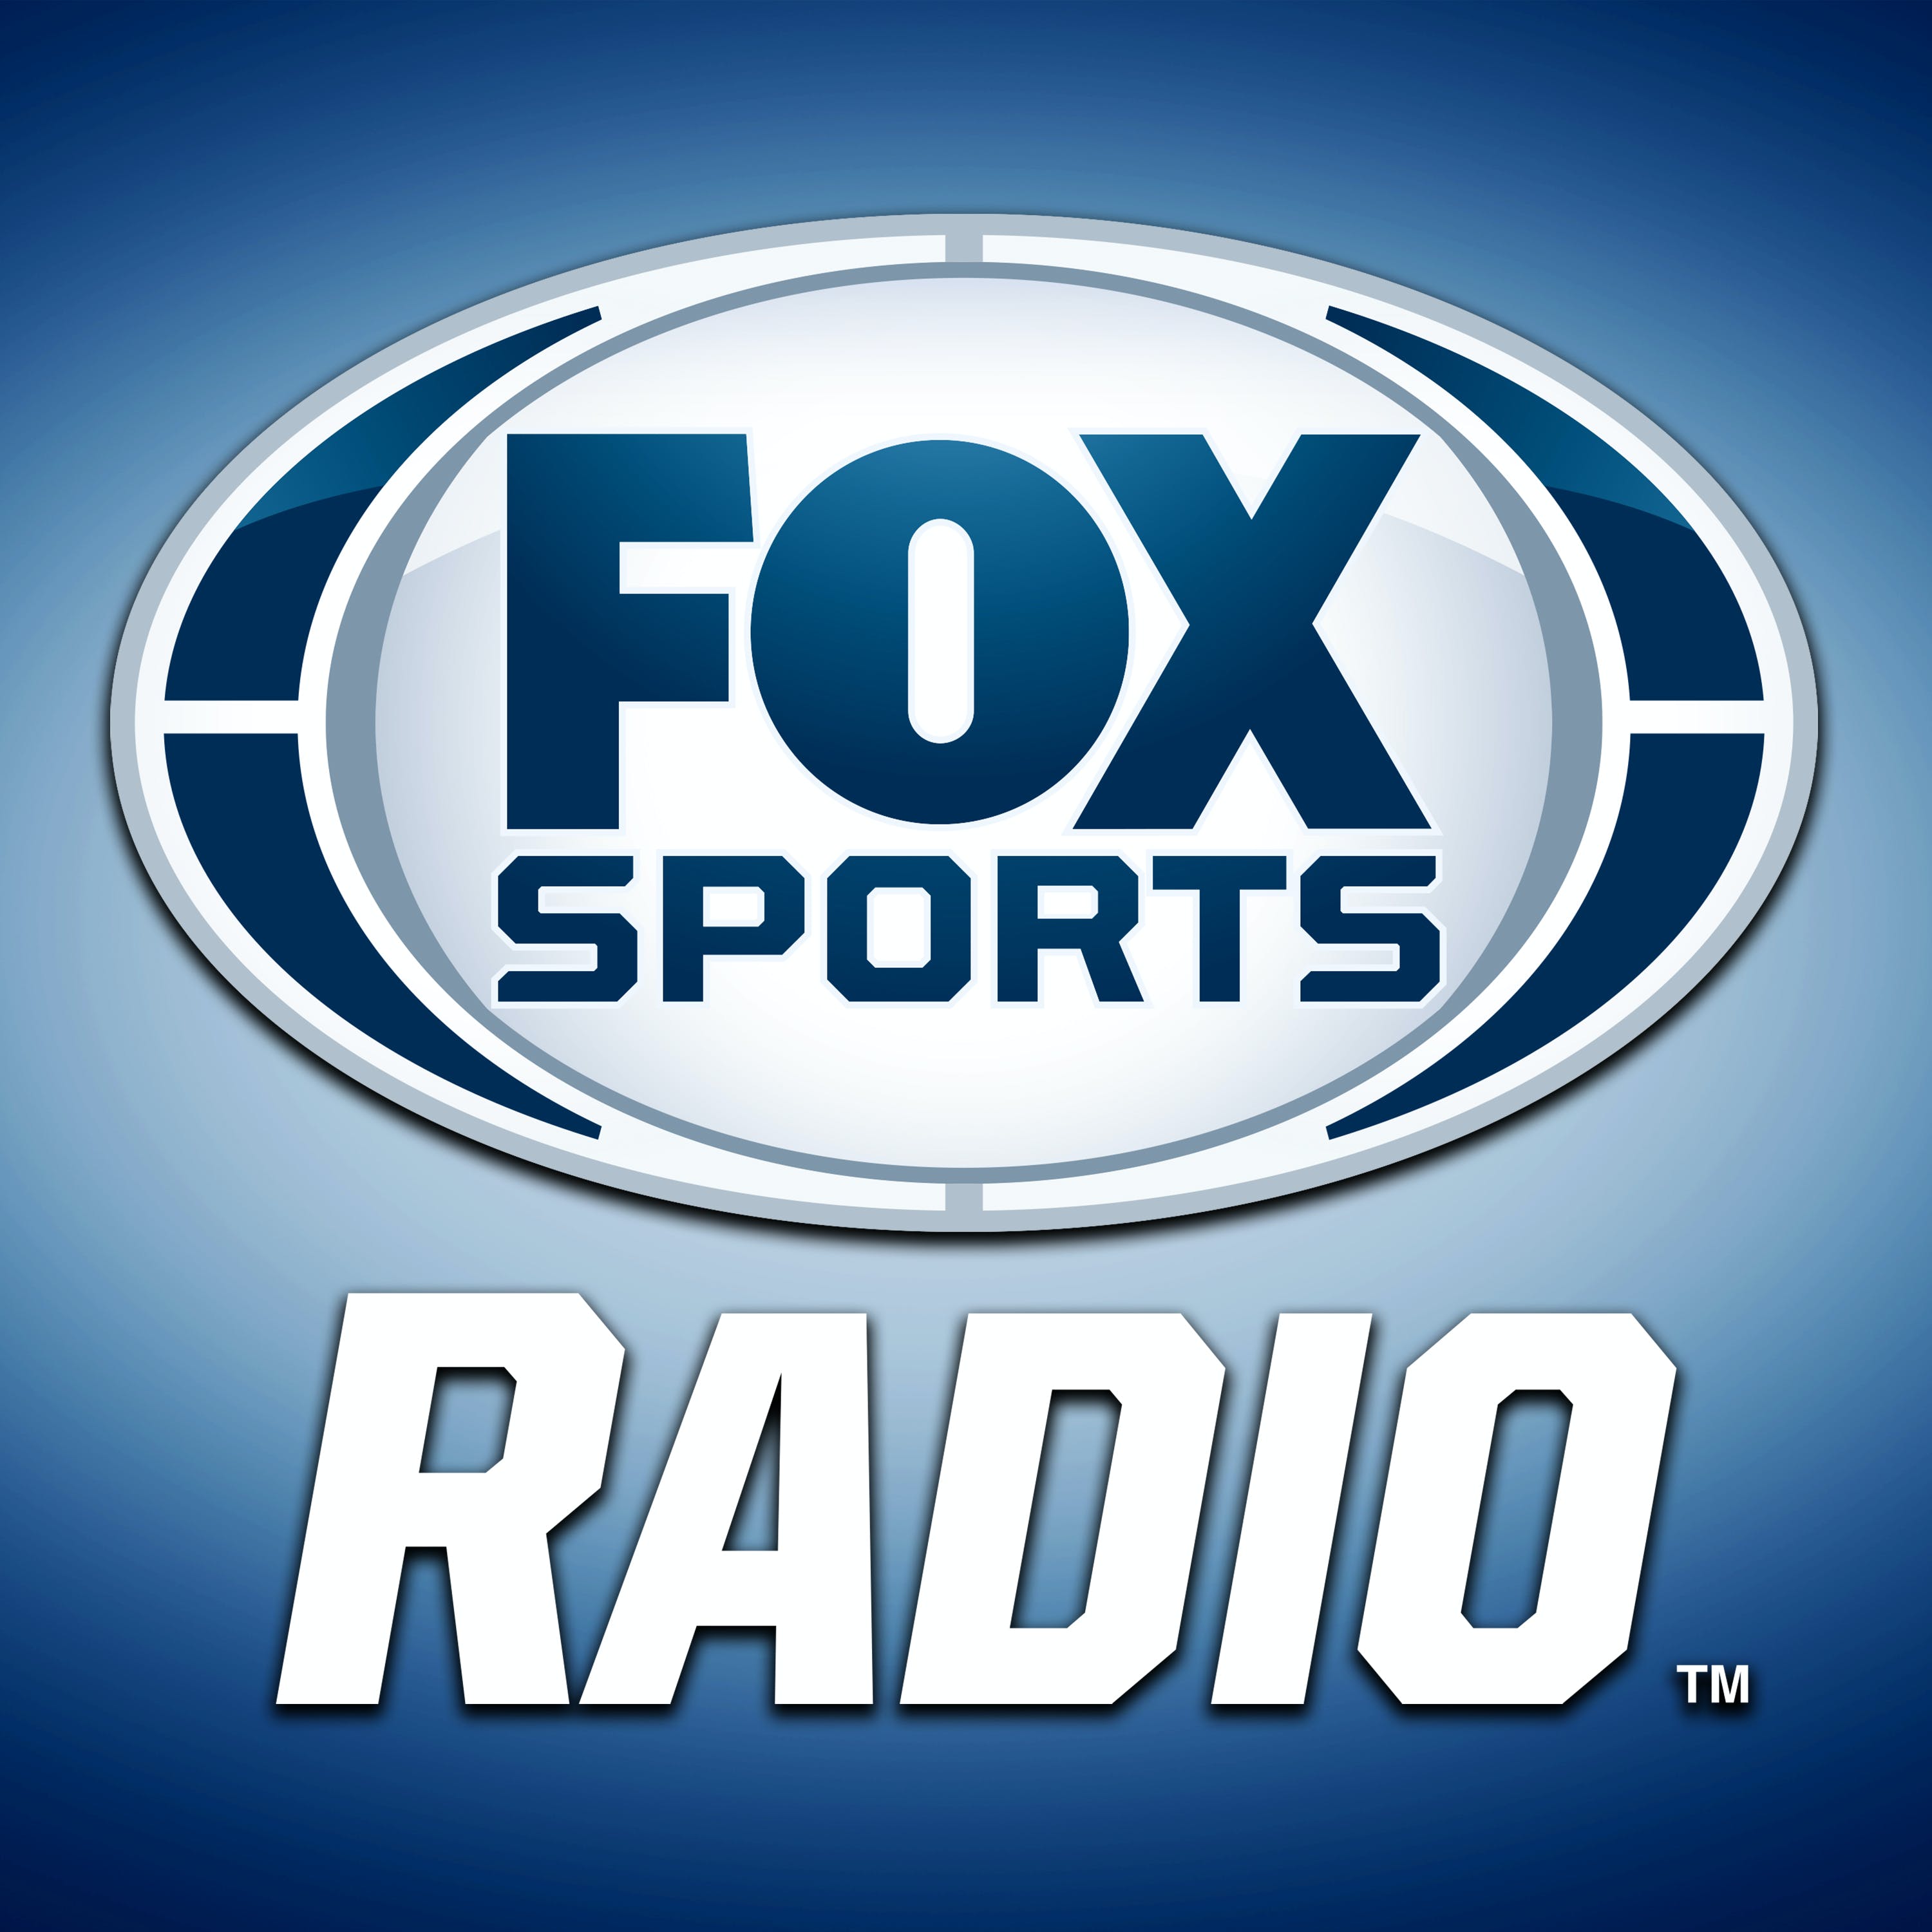 11/07/2020 – FOX Football Saturday with Hartman and Arrington – Live reaction to College Football Week 10, NFL Week 9 preview, Guest – Caleb Keller